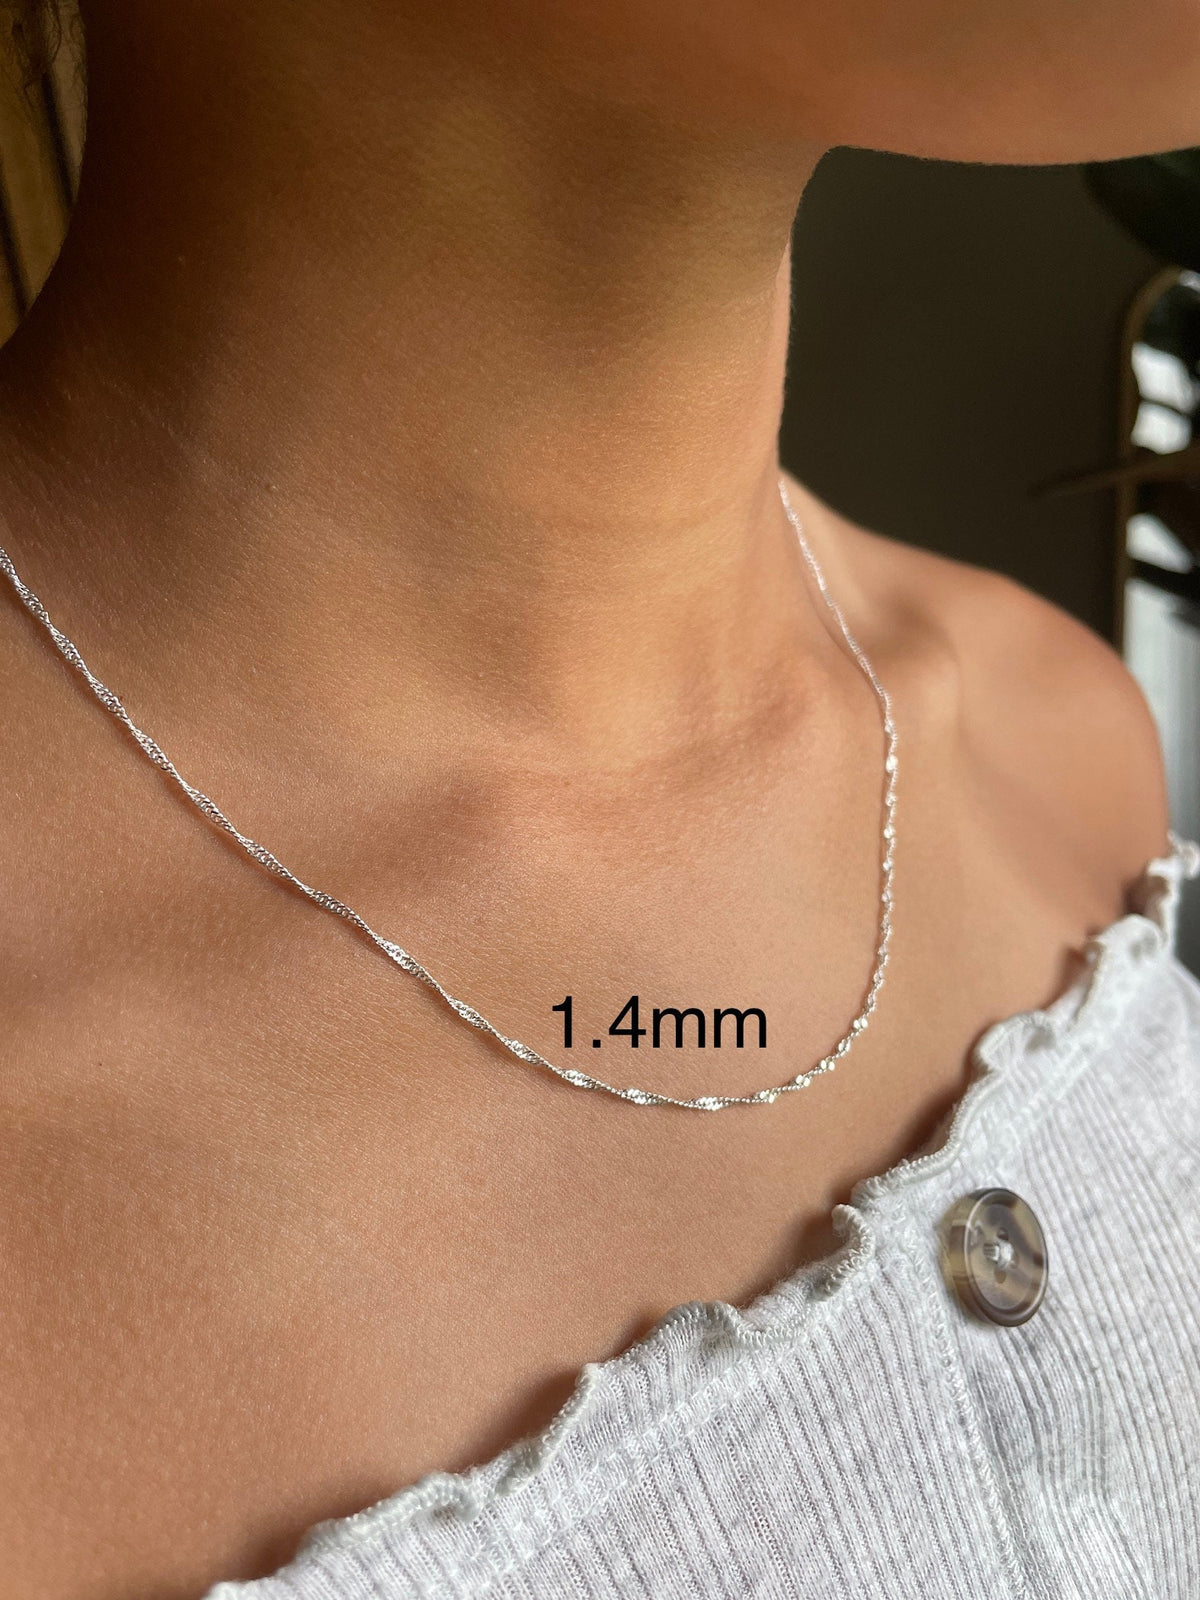 Pendant Chains in Sterling Silver / 10k Yellow Gold / 10k White Gold / 14k Yellow Gold / 14k White Gold / Gift Box Included